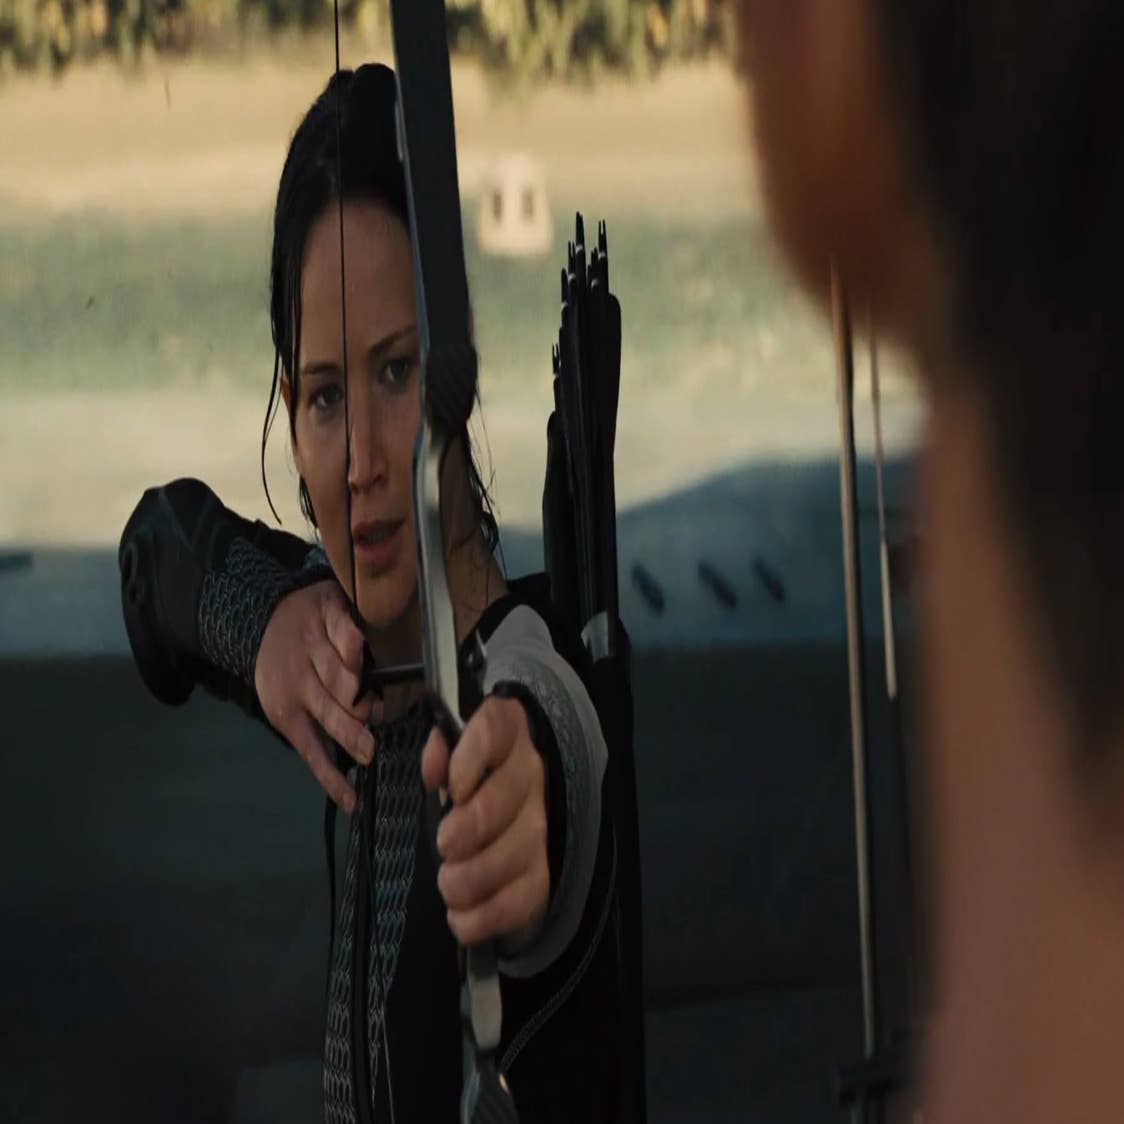 The Hunger Games In Order: How to Watch the Movies Chronologically